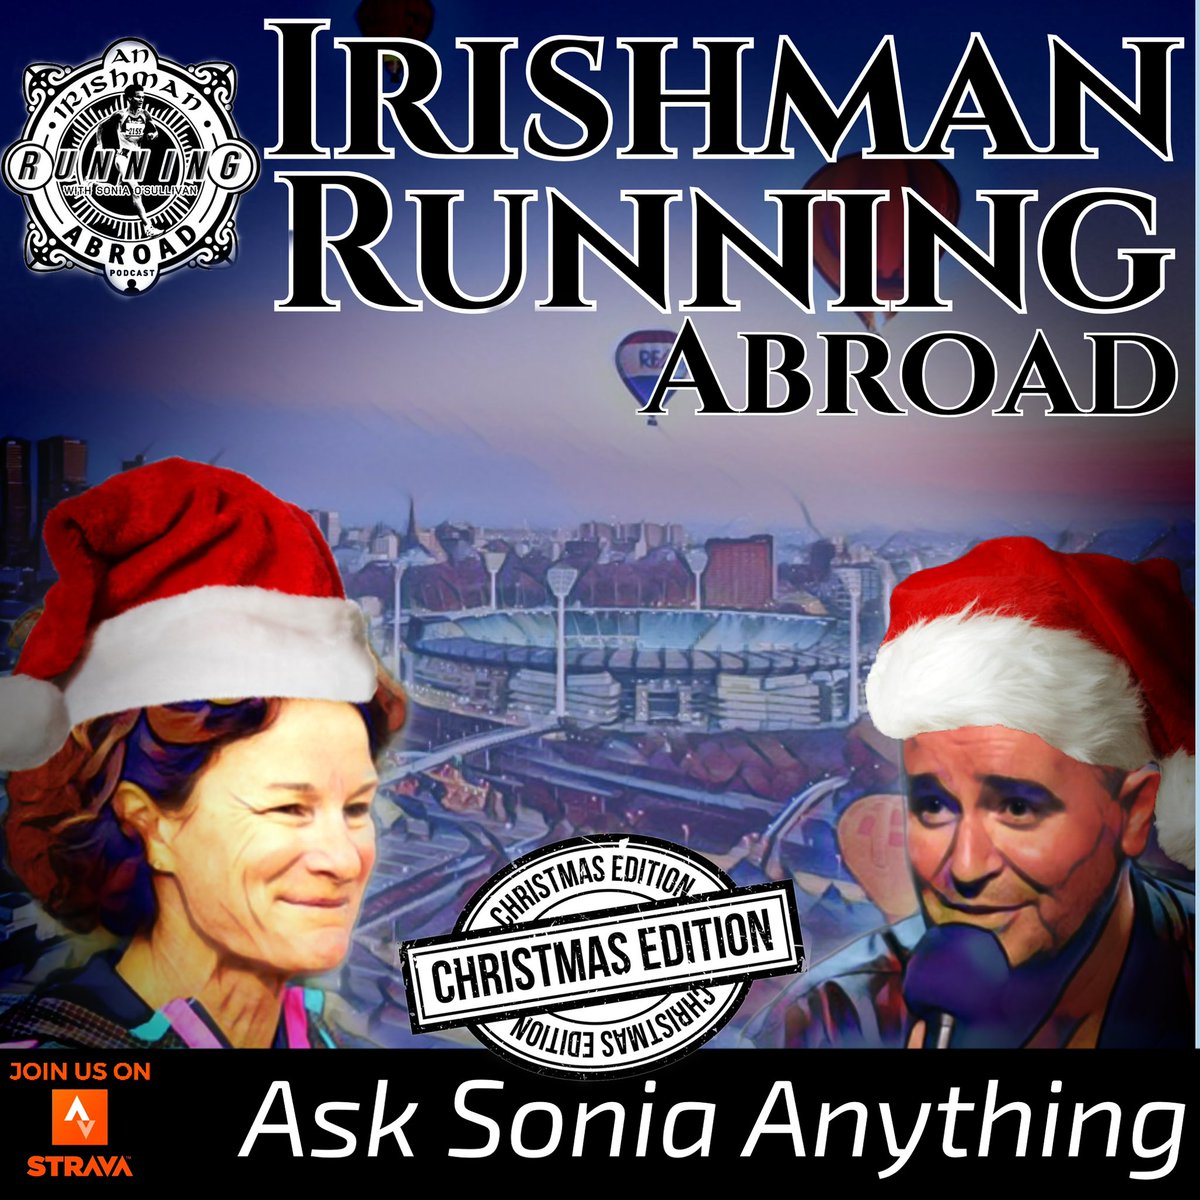 You ask, @soniaagrith answers. We delve deep into the mailbag this week on #IrishmanRunningAbroad. From pacing to beating the urge not to run, Sonia has an answer & solution for everything. If she can get me running she can get you running. #LinkInBio